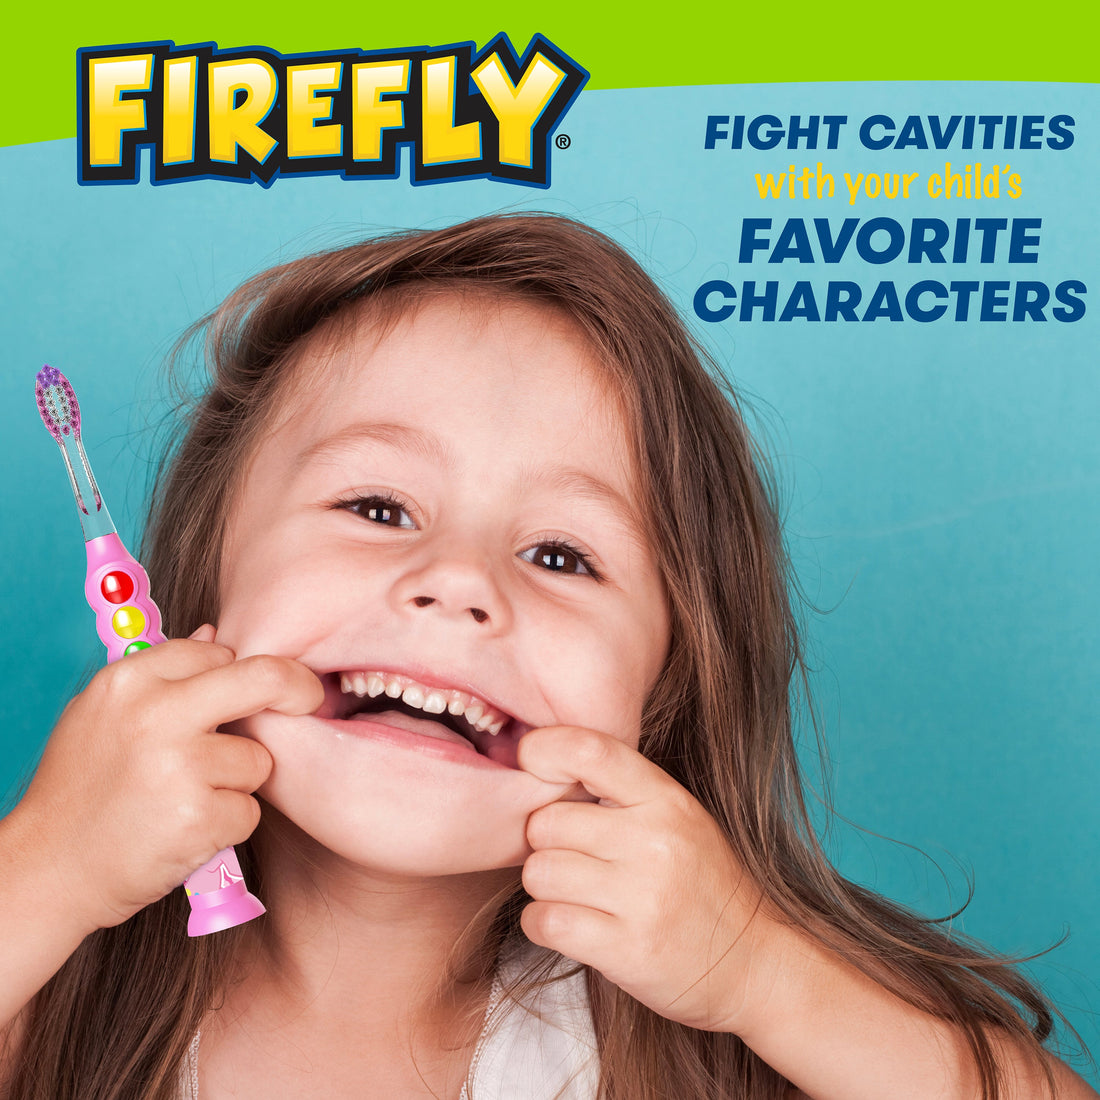 Child smiling wide holding a My Little Pony Pink Toothbrush. Fight cavities with your child&